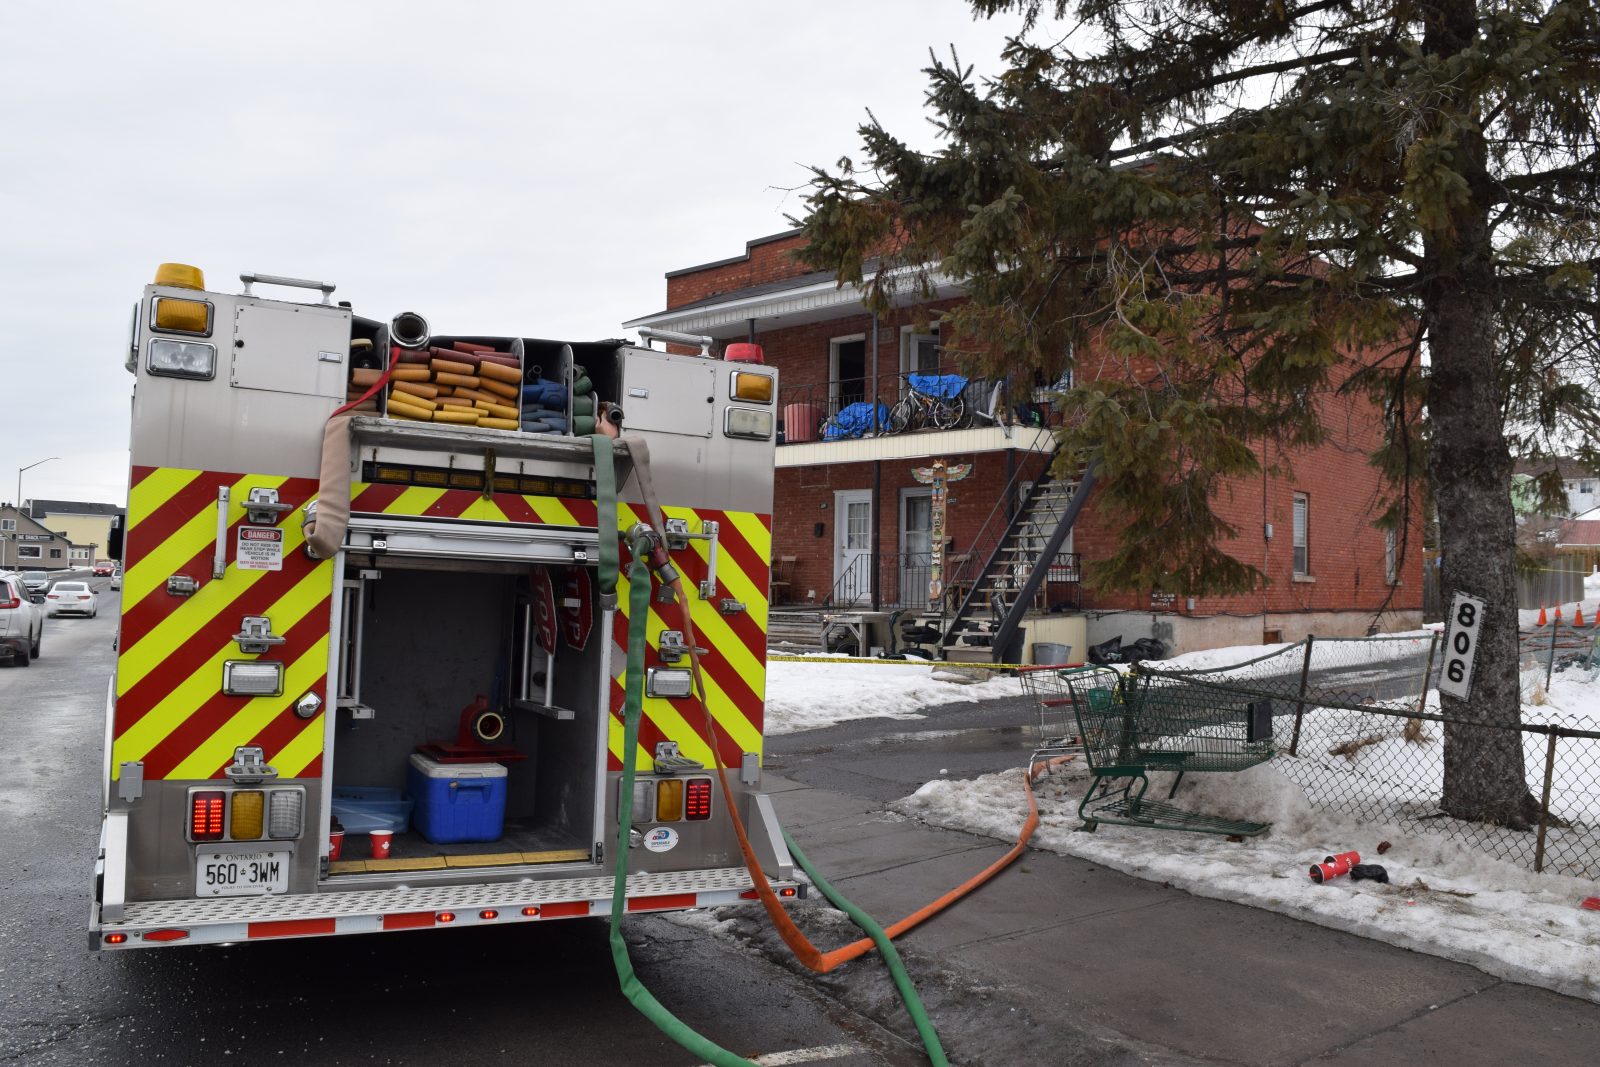 Early morning fire results in injuries